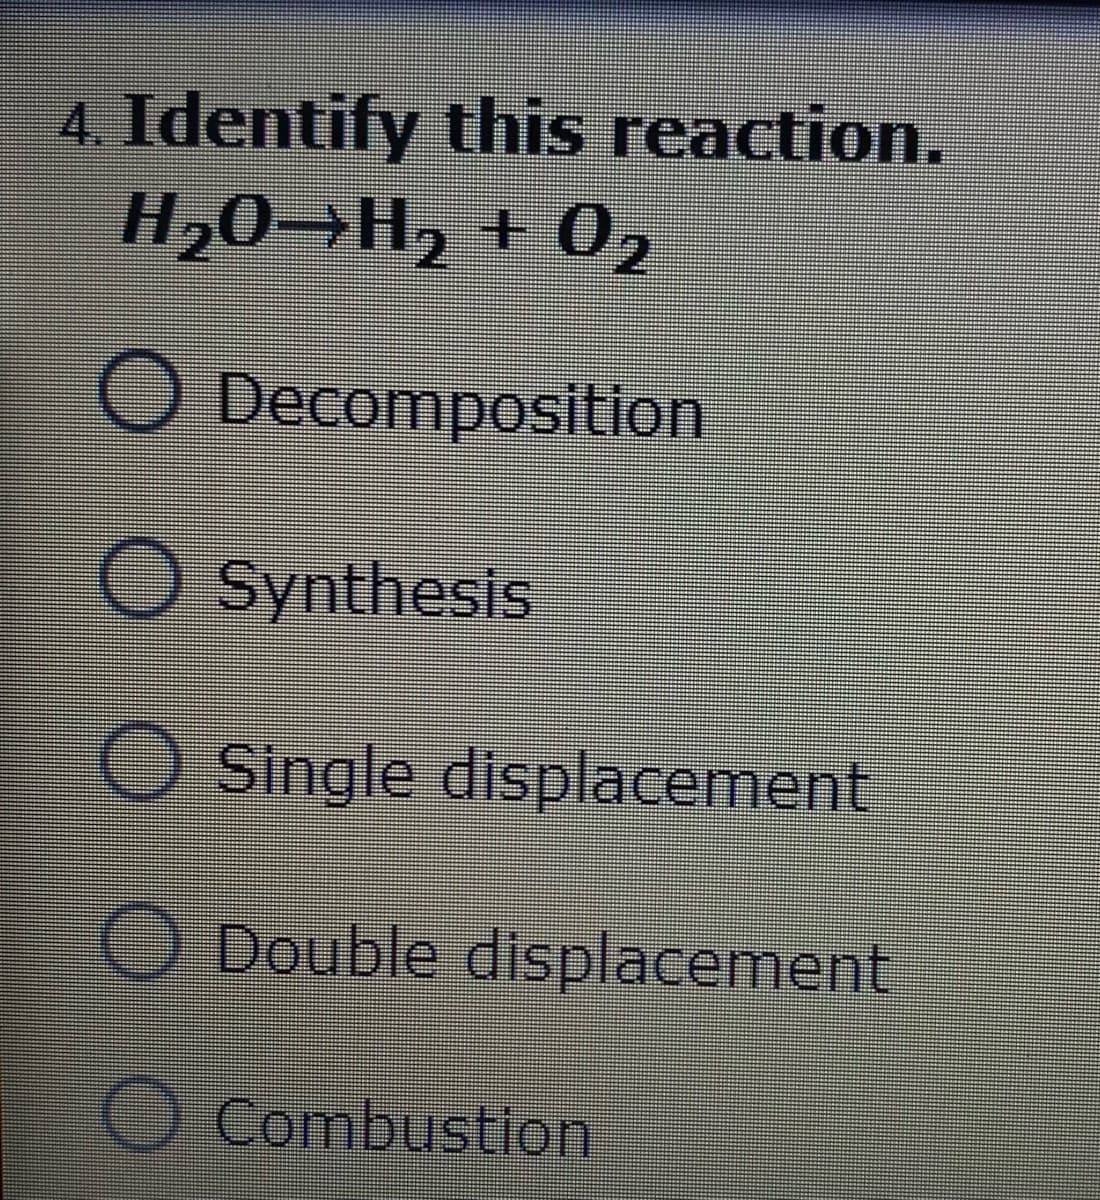 4. Identify this reaction.
H20 H2 + 02
O Decomposition
Synthesis
O Single displacement
ODouble displacement
O Combustion
